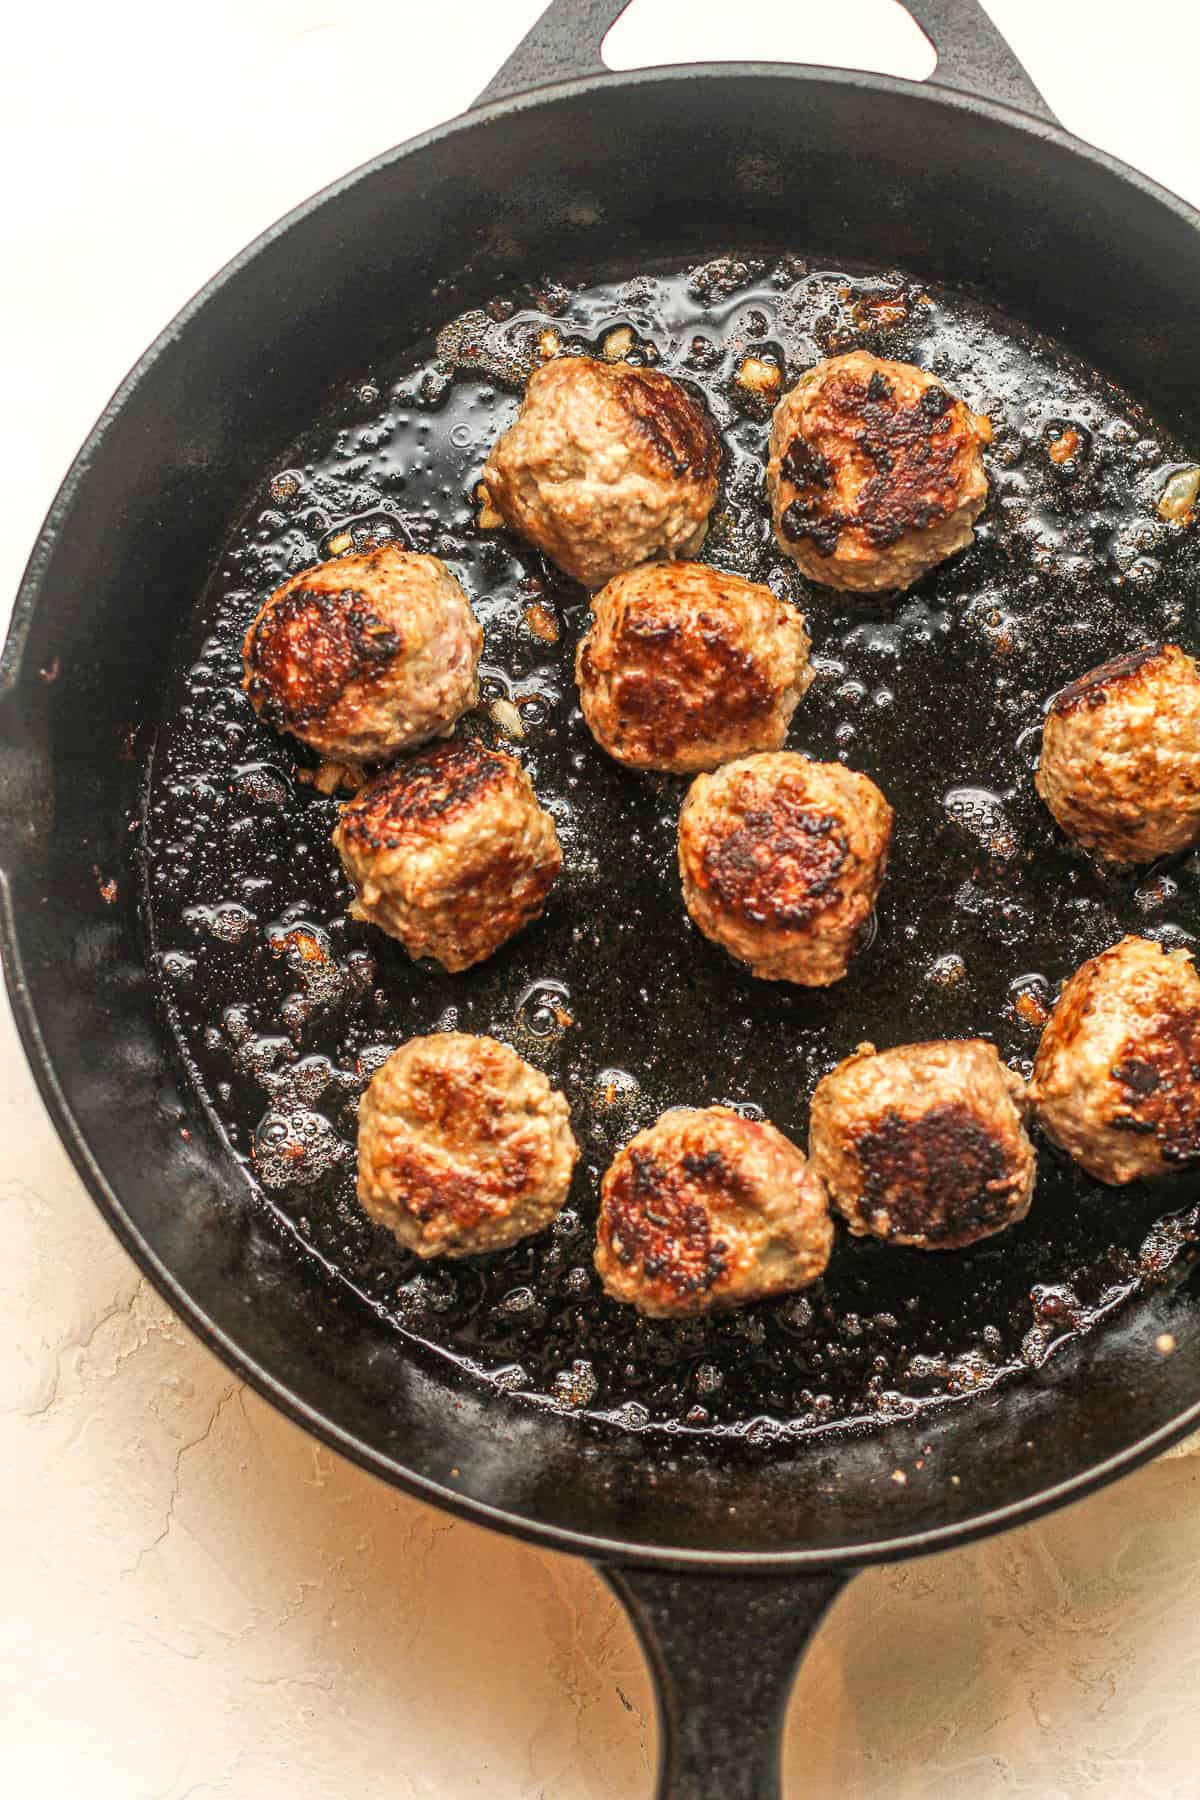 A cast iron skillet of cooked meatballs.